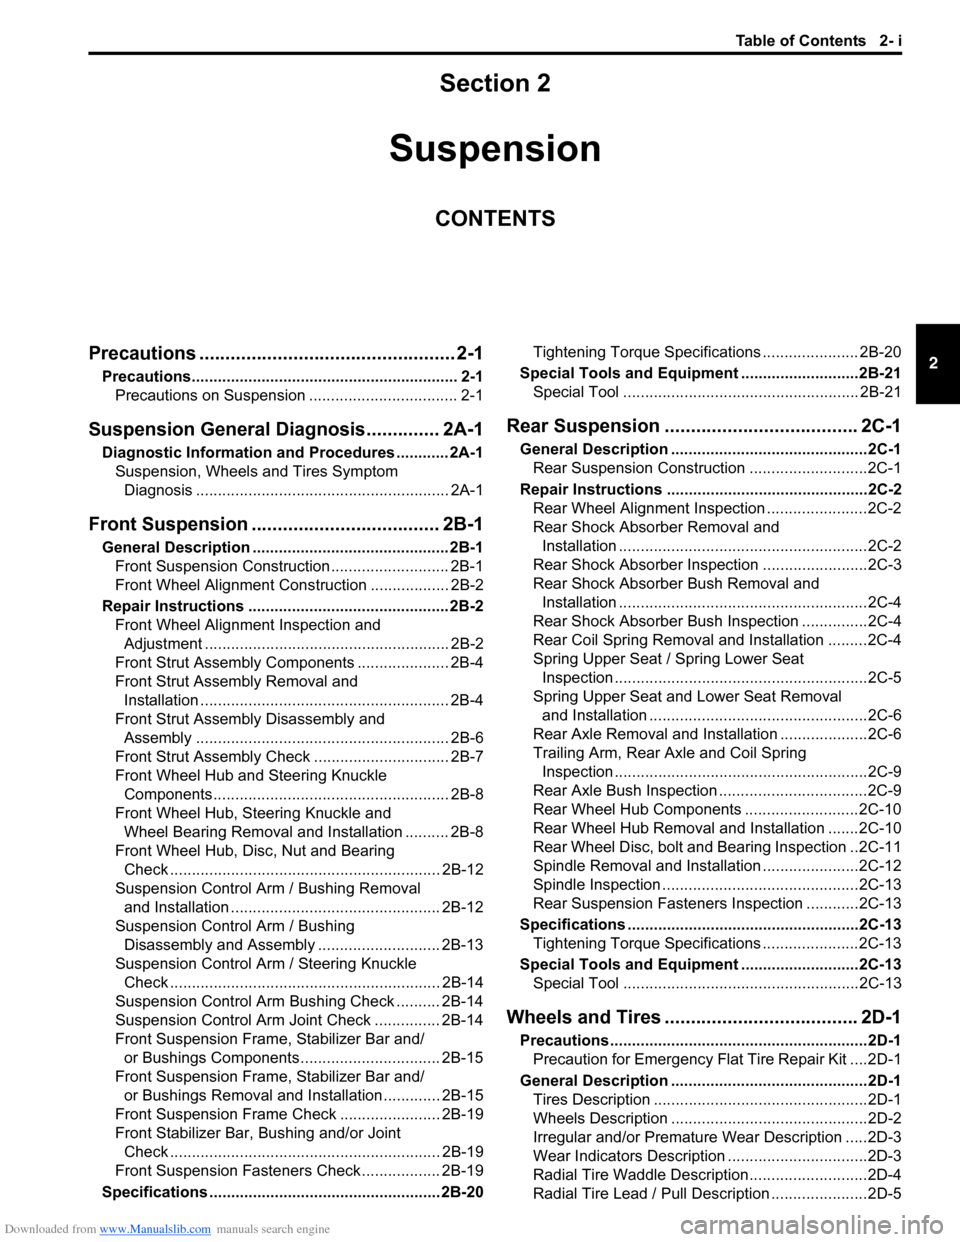 SUZUKI SWIFT 2006 2.G Service Service Manual Downloaded from www.Manualslib.com manuals search engine Table of Contents 2- i
2
Section 2
CONTENTS
Suspension
Precautions ................................................. 2-1
Precautions...........